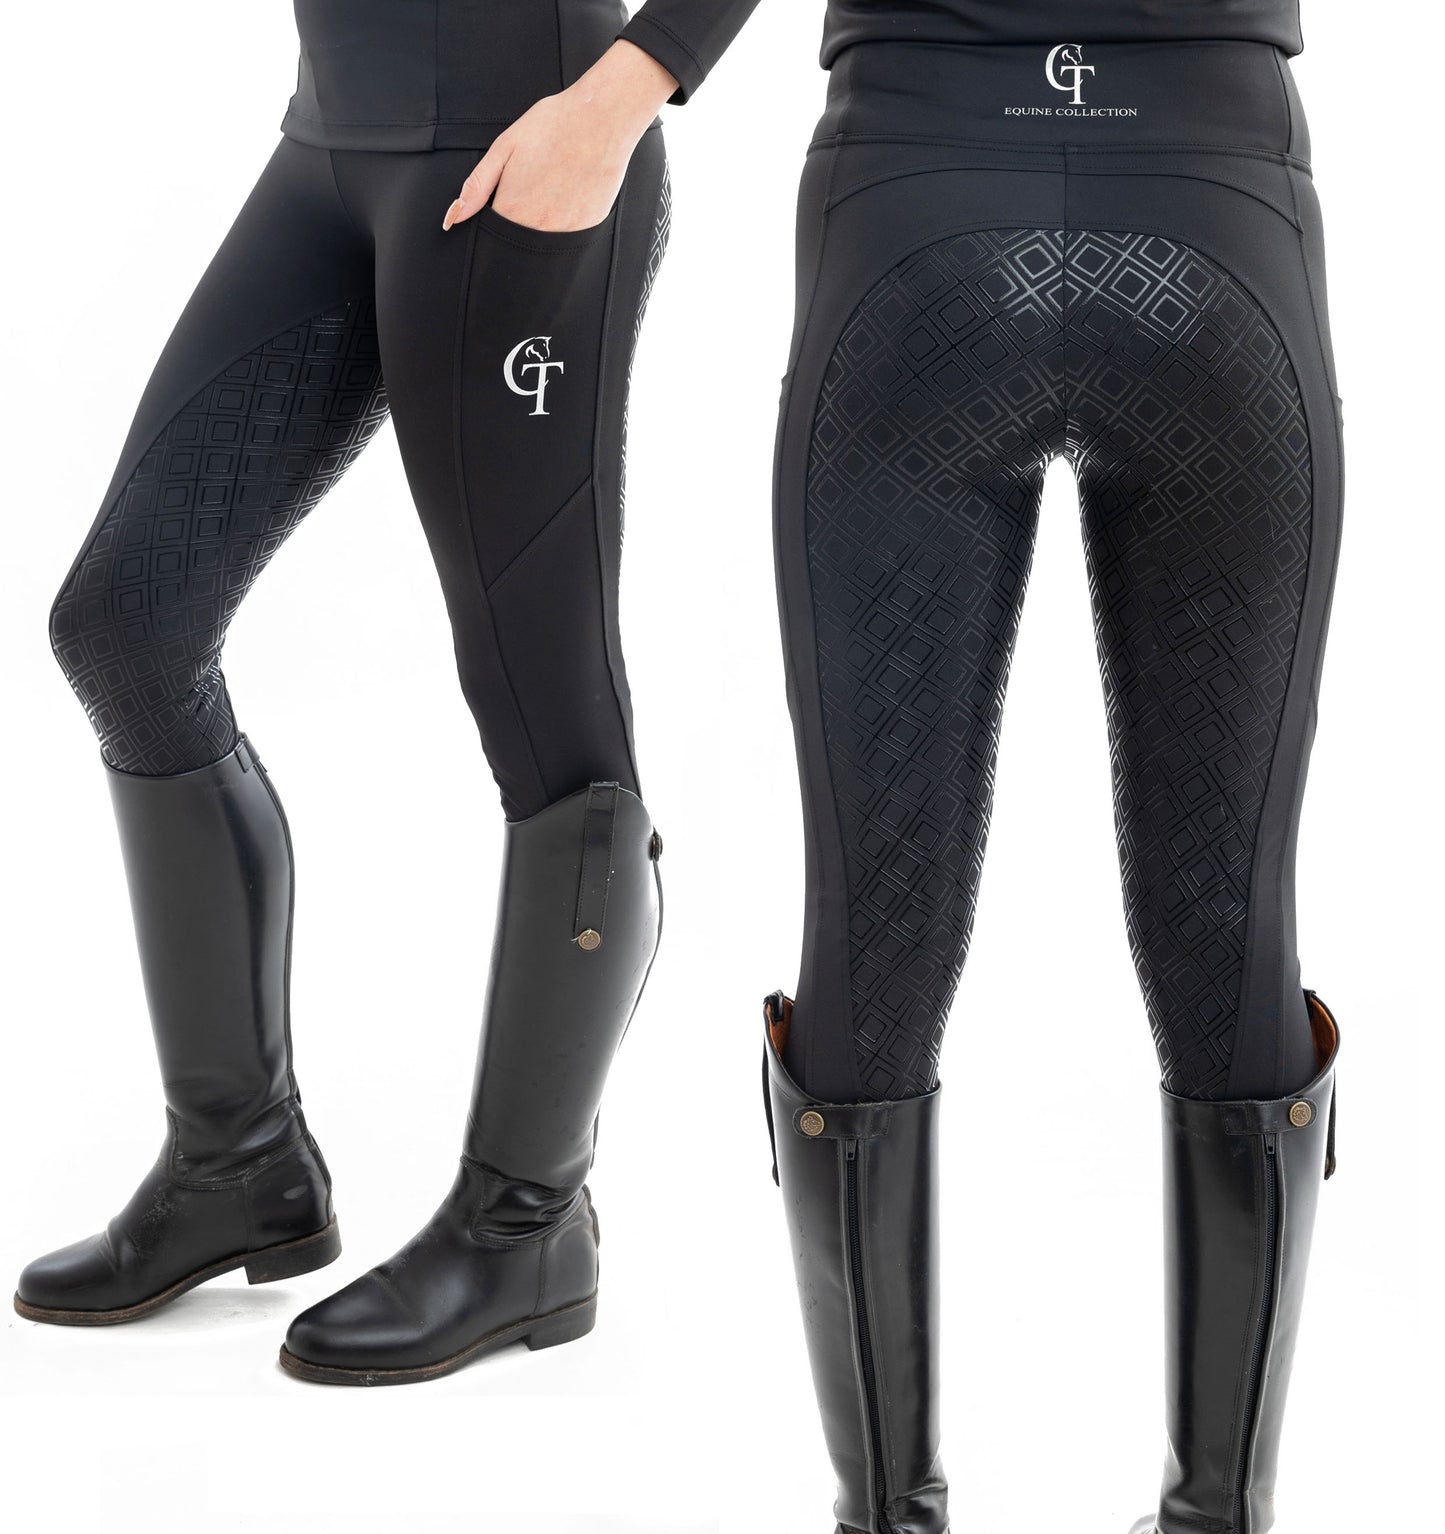 Shop Riding Leggings at CT Equine Collection